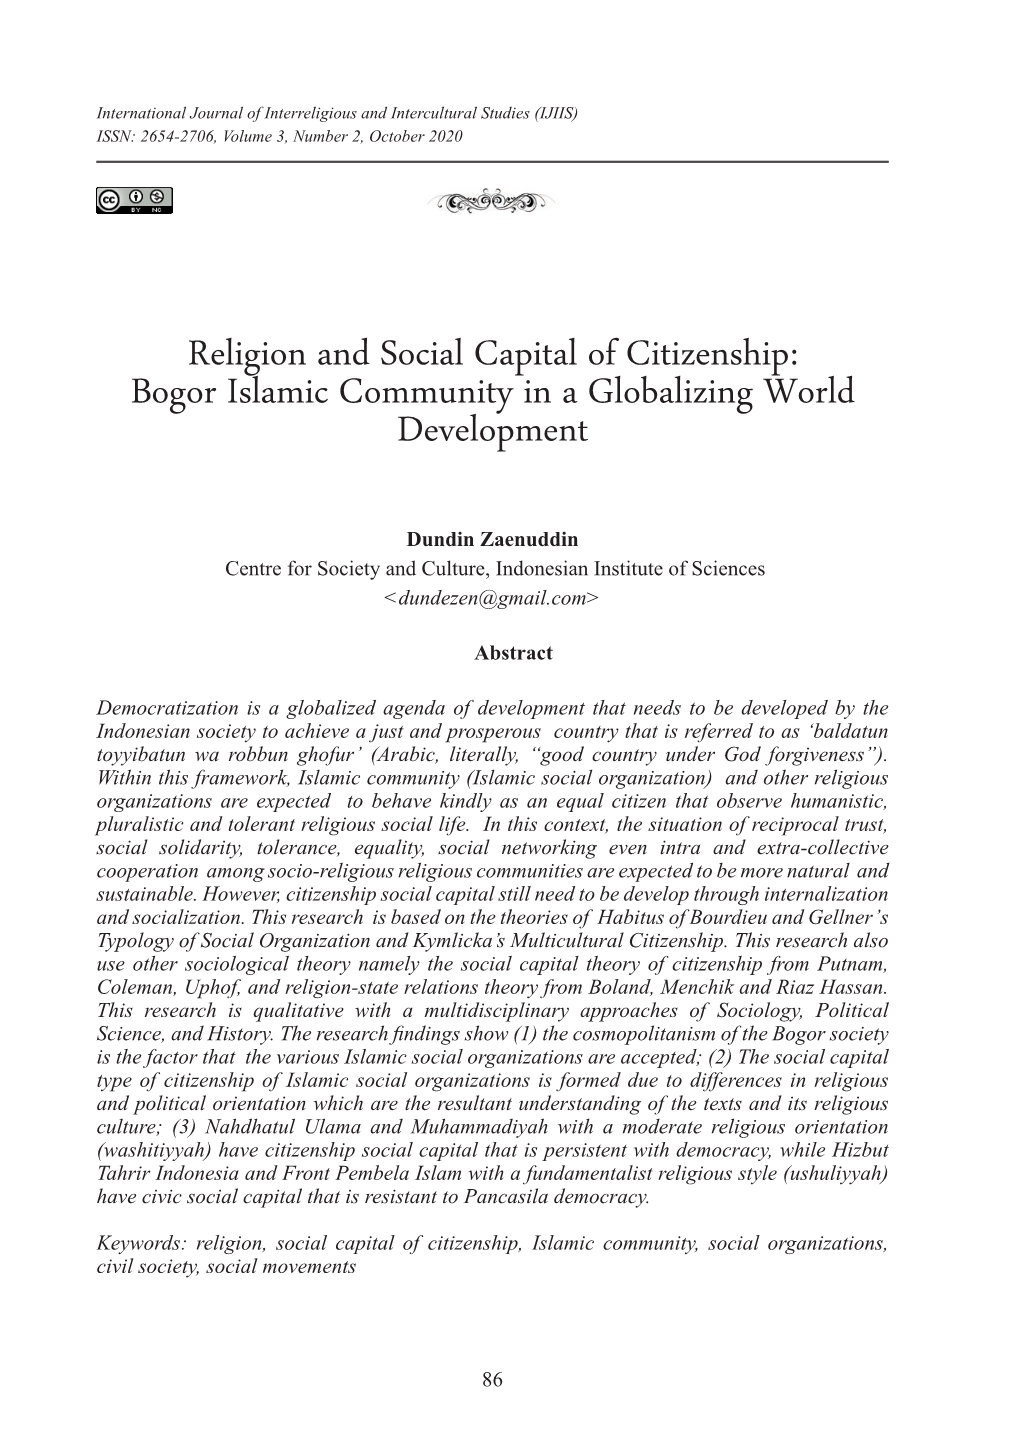 Religion and Social Capital of Citizenship: Bogor Islamic Community in a Globalizing World Development